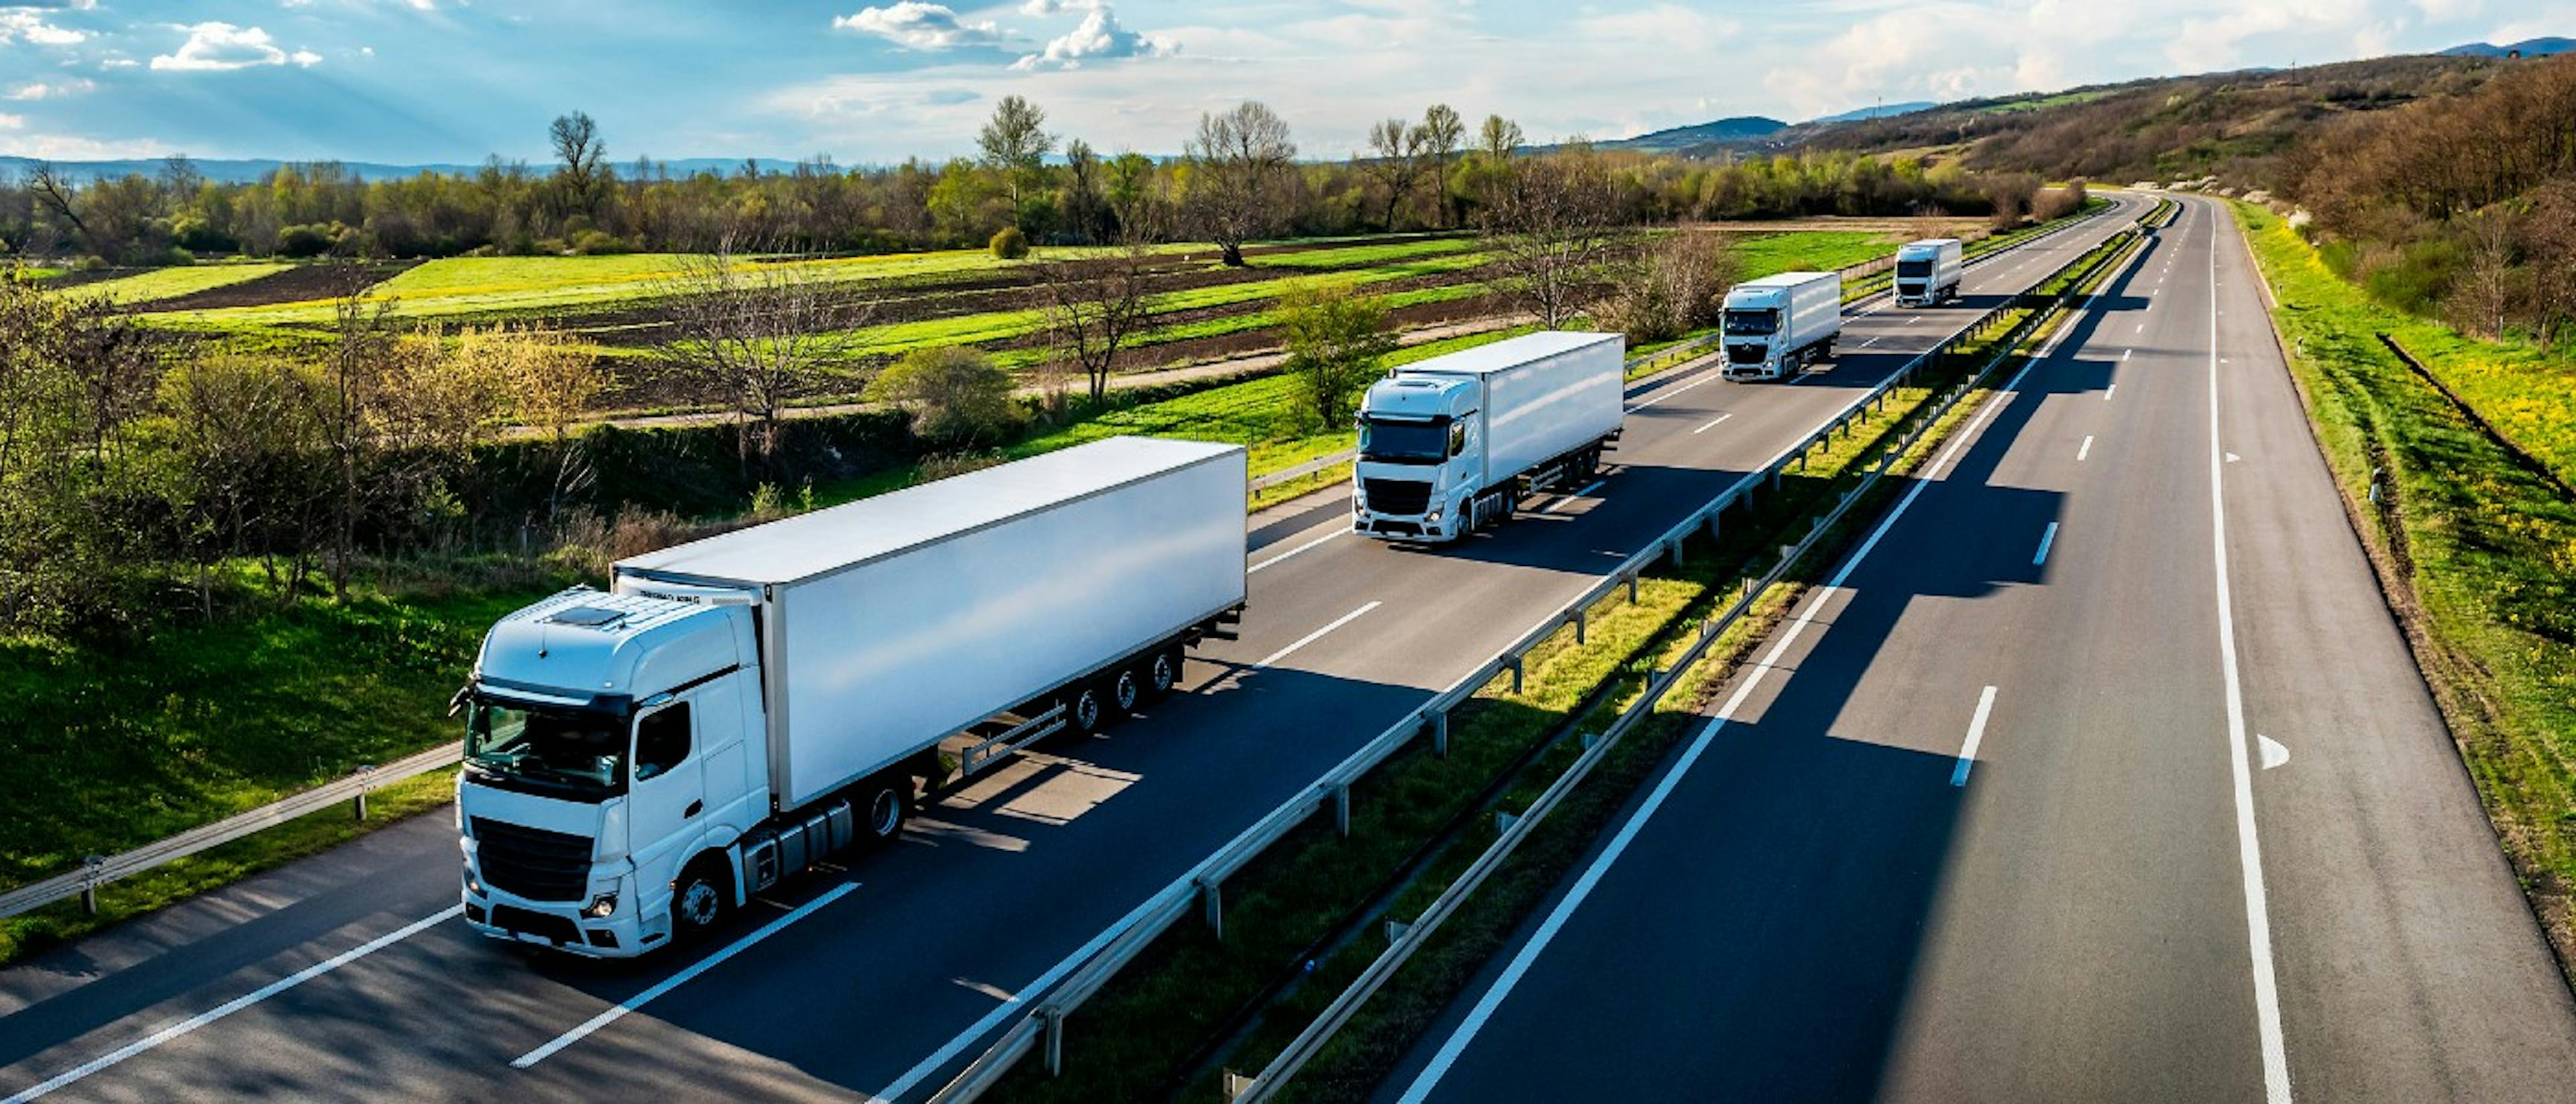 featured image - 7 Consequences of Autonomous Trucks in the Supply Chain